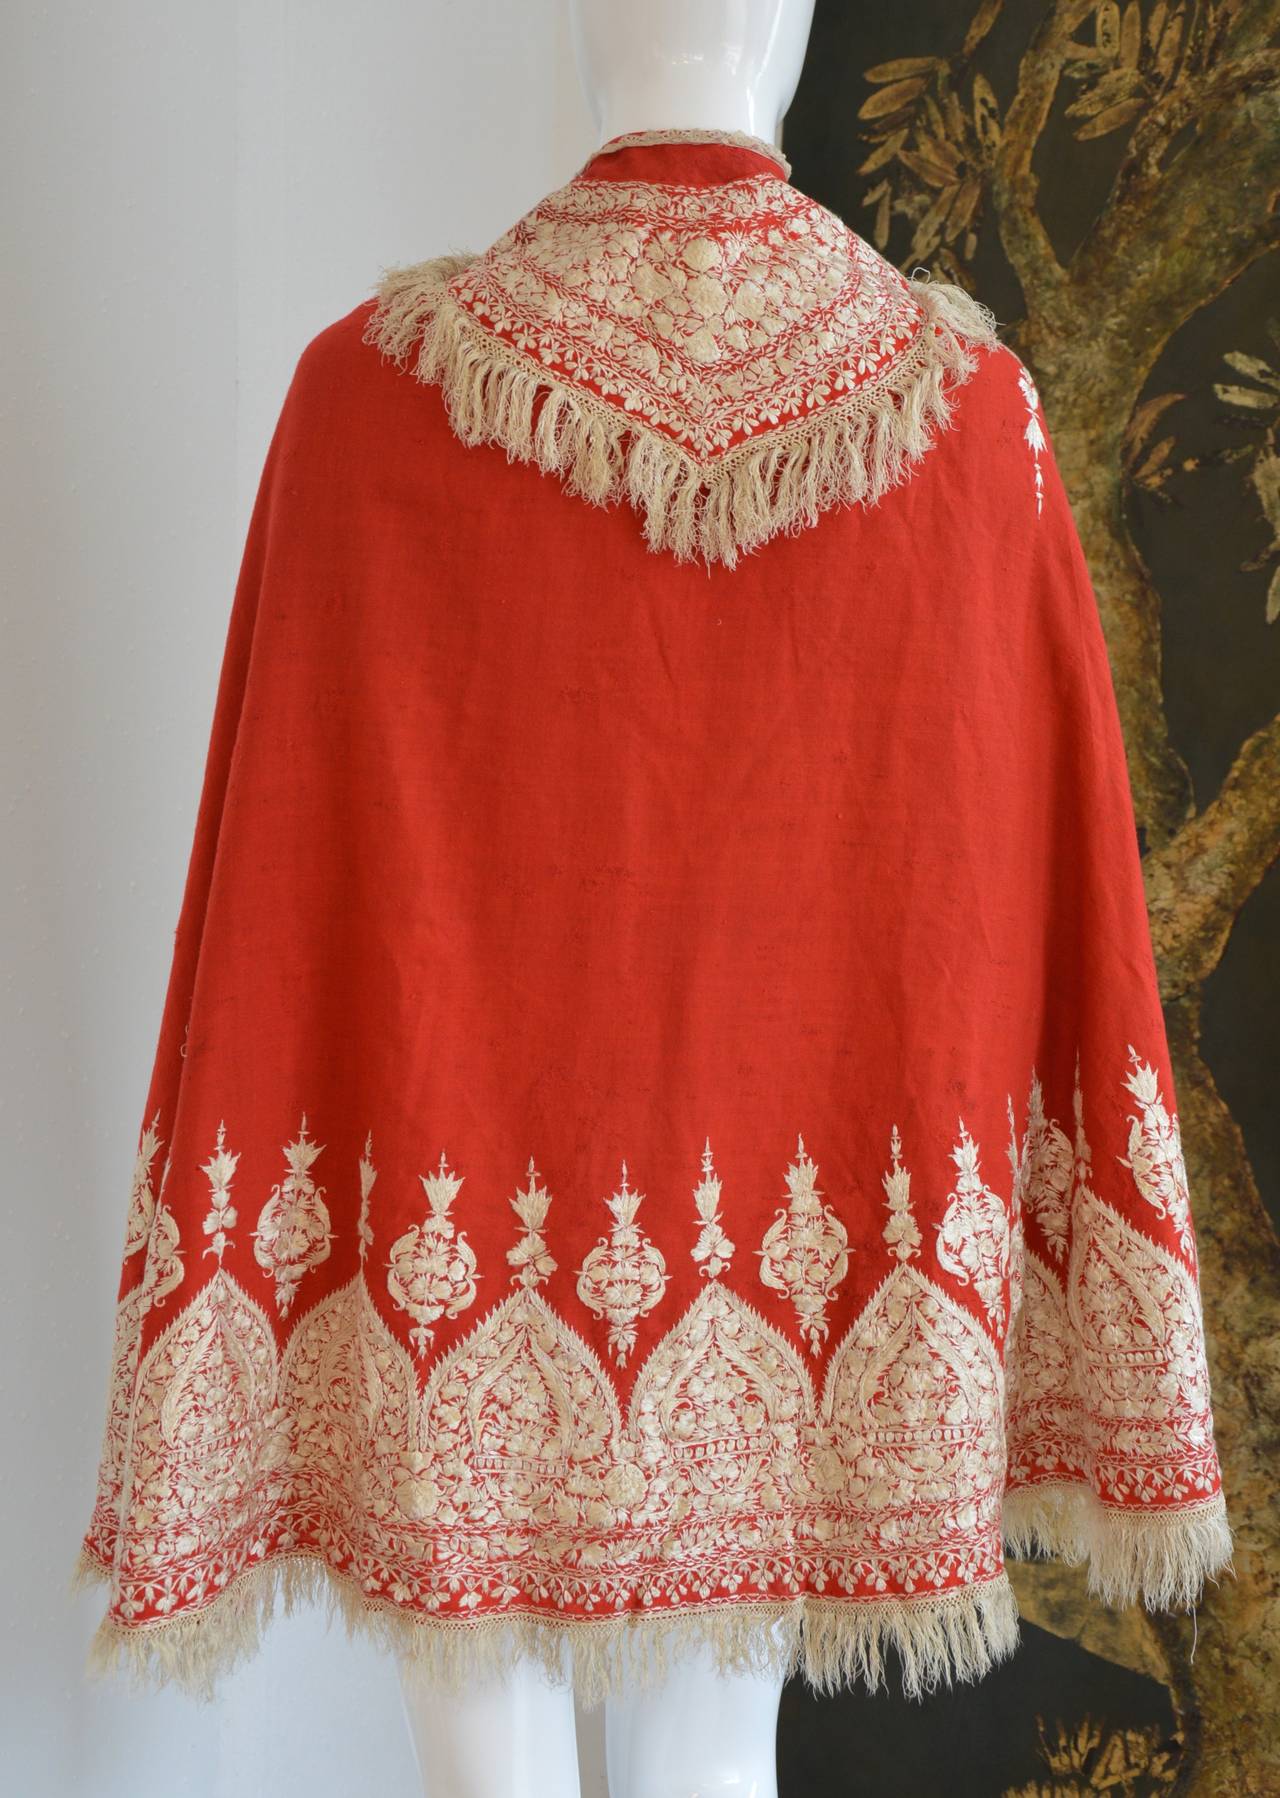 Women's or Men's End of 19th century French Cape made of an Indian Embroidered Cashmere Shawl